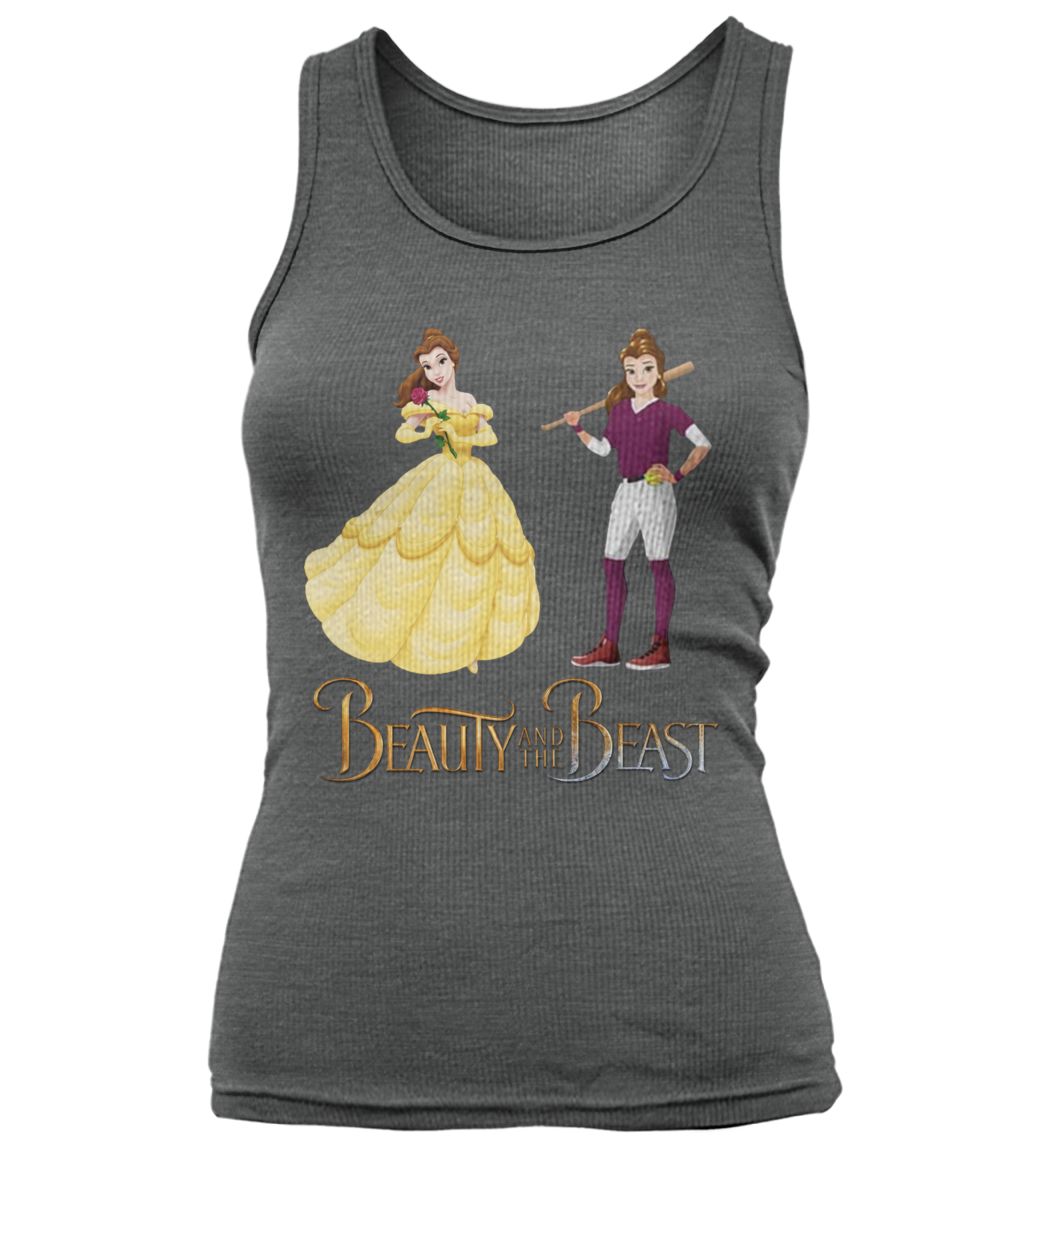 Beauty and the beast belle and baseball girl women's tank top